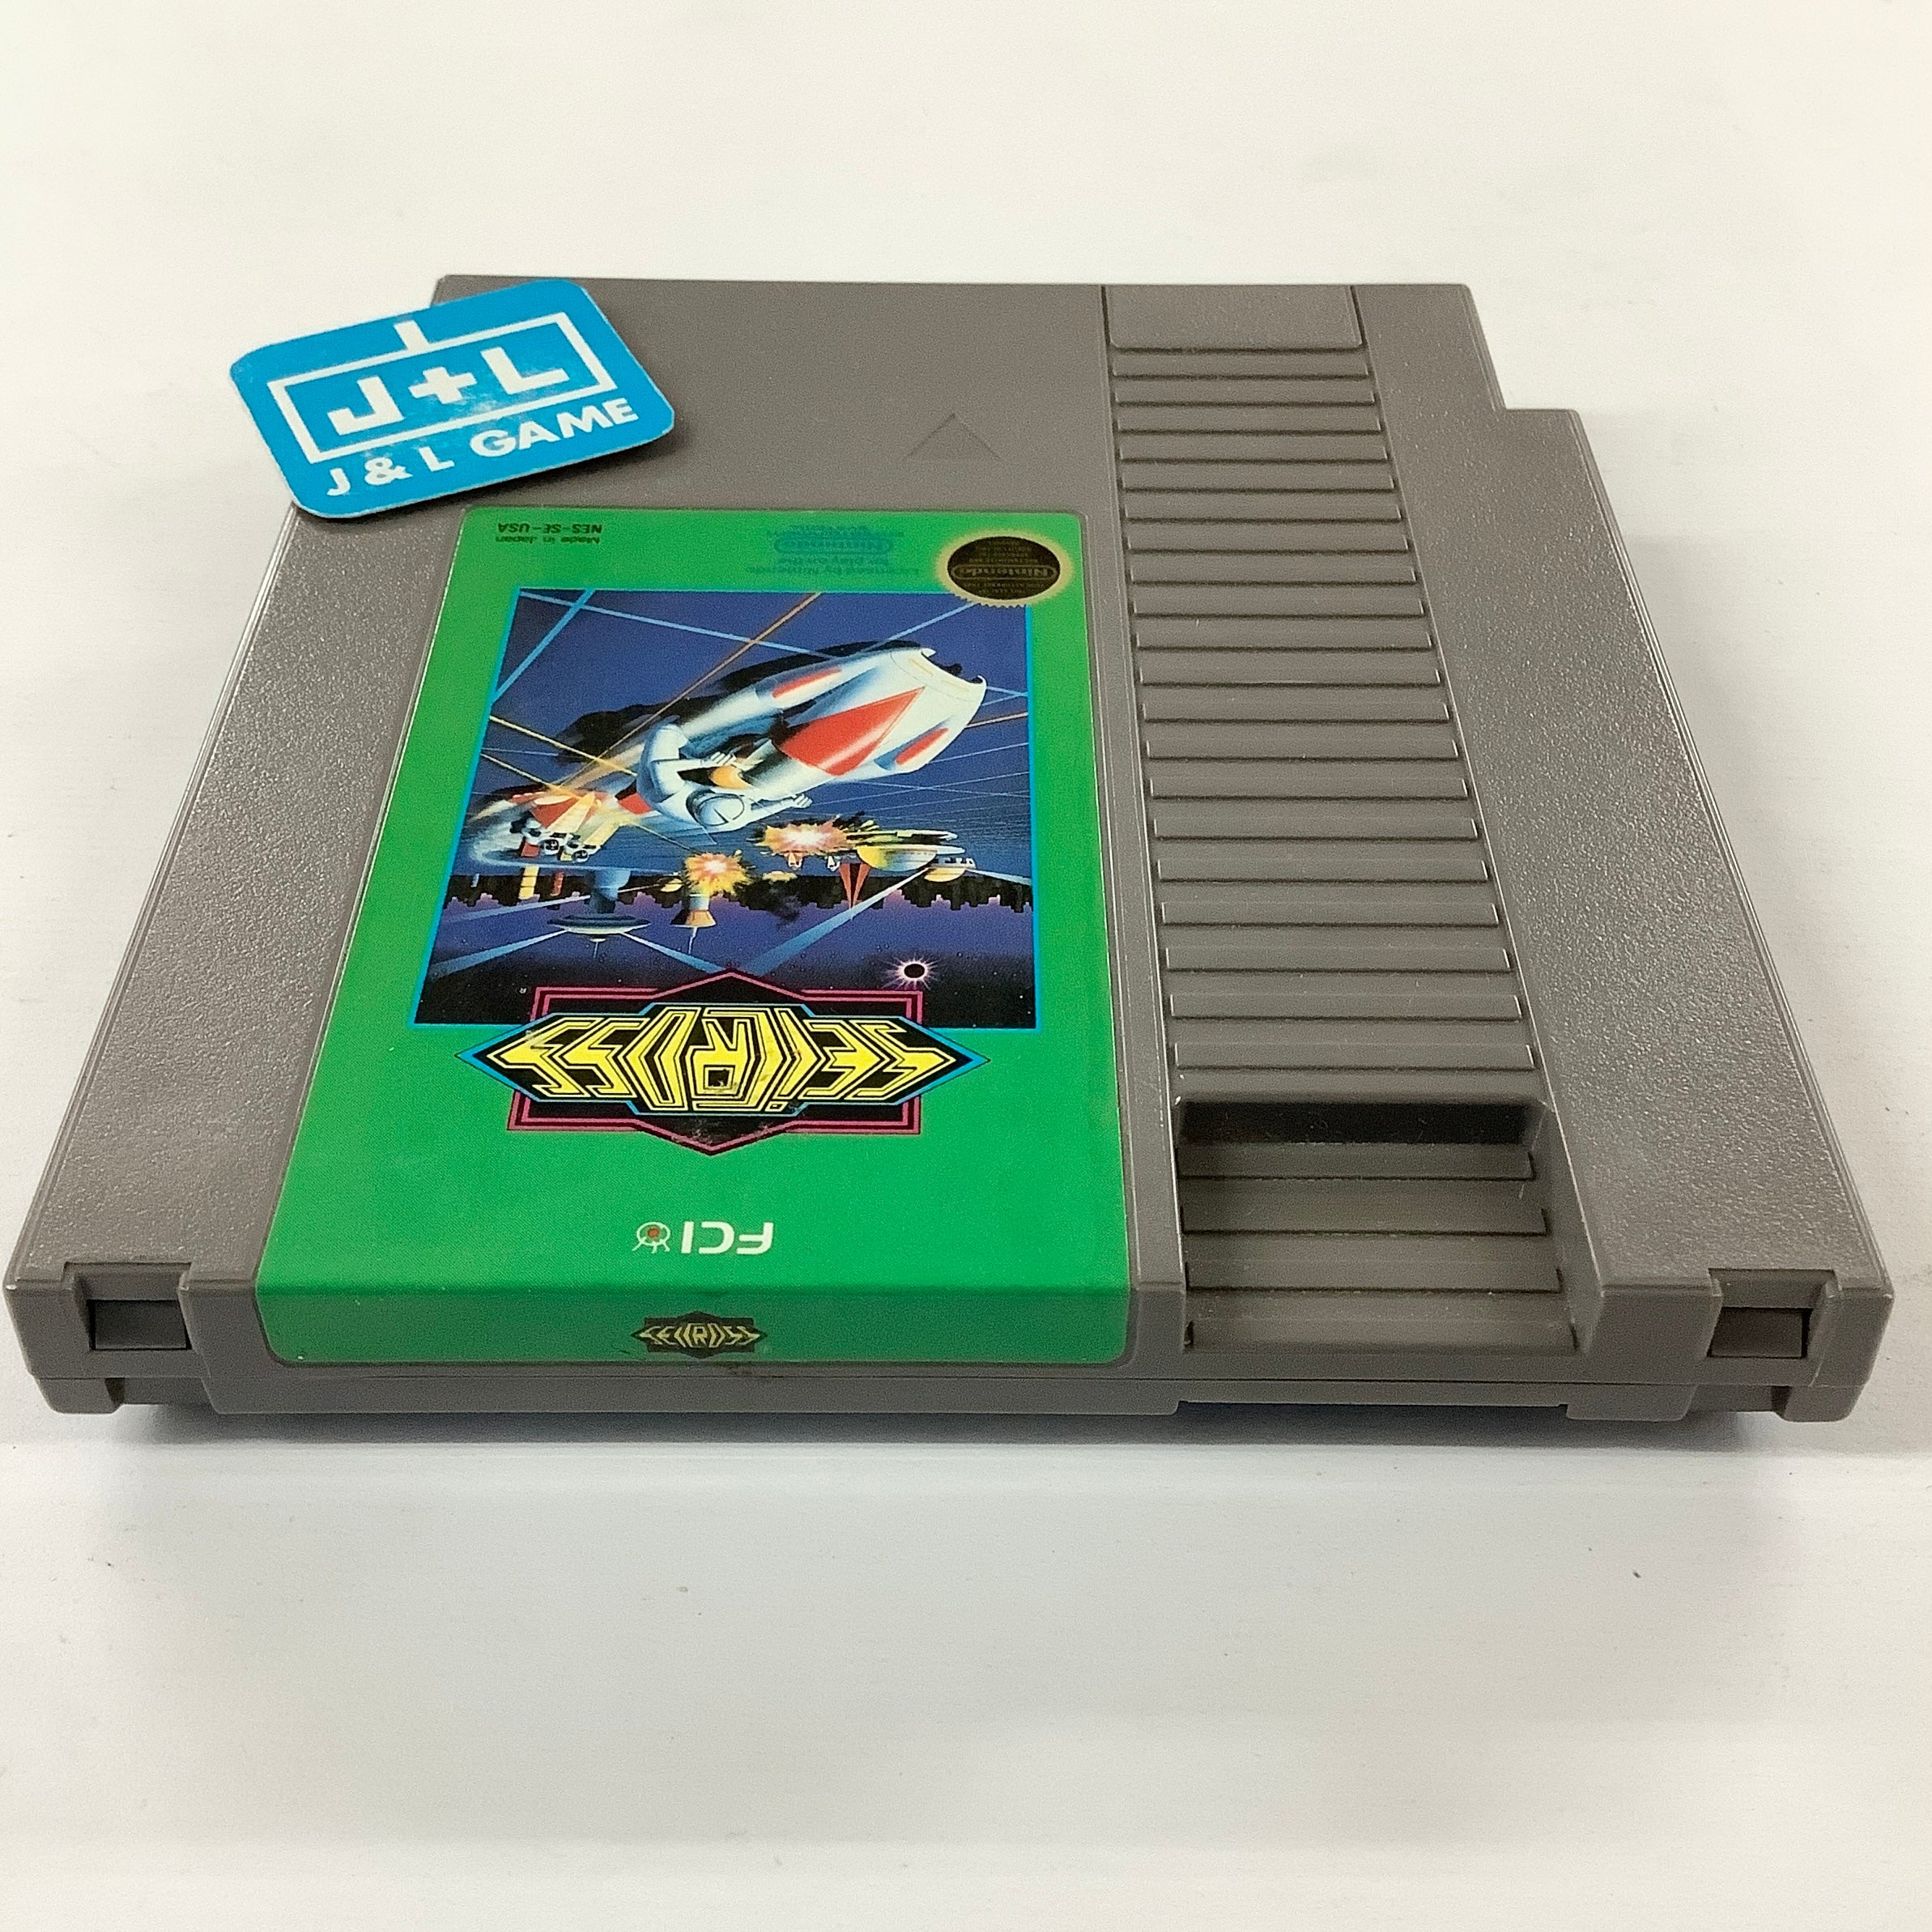 Seicross - (NES) Nintendo Entertainment System [Pre-Owned] Video Games FCI, Inc.   